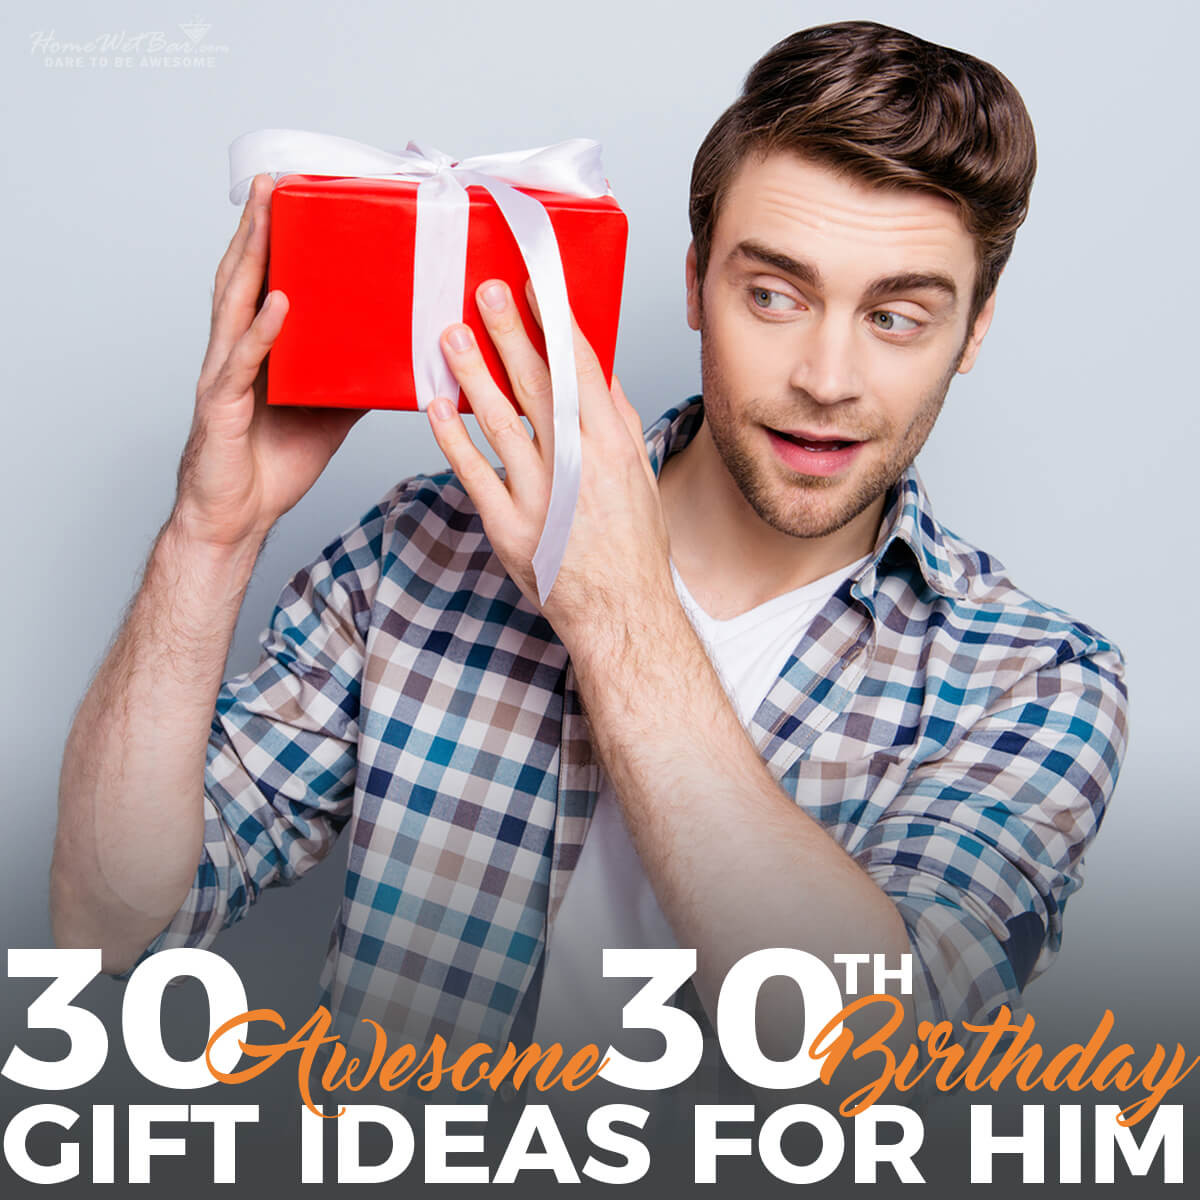 30th Birthday Gift Ideas For Men
 30 Awesome 30th Birthday Gift Ideas for Him